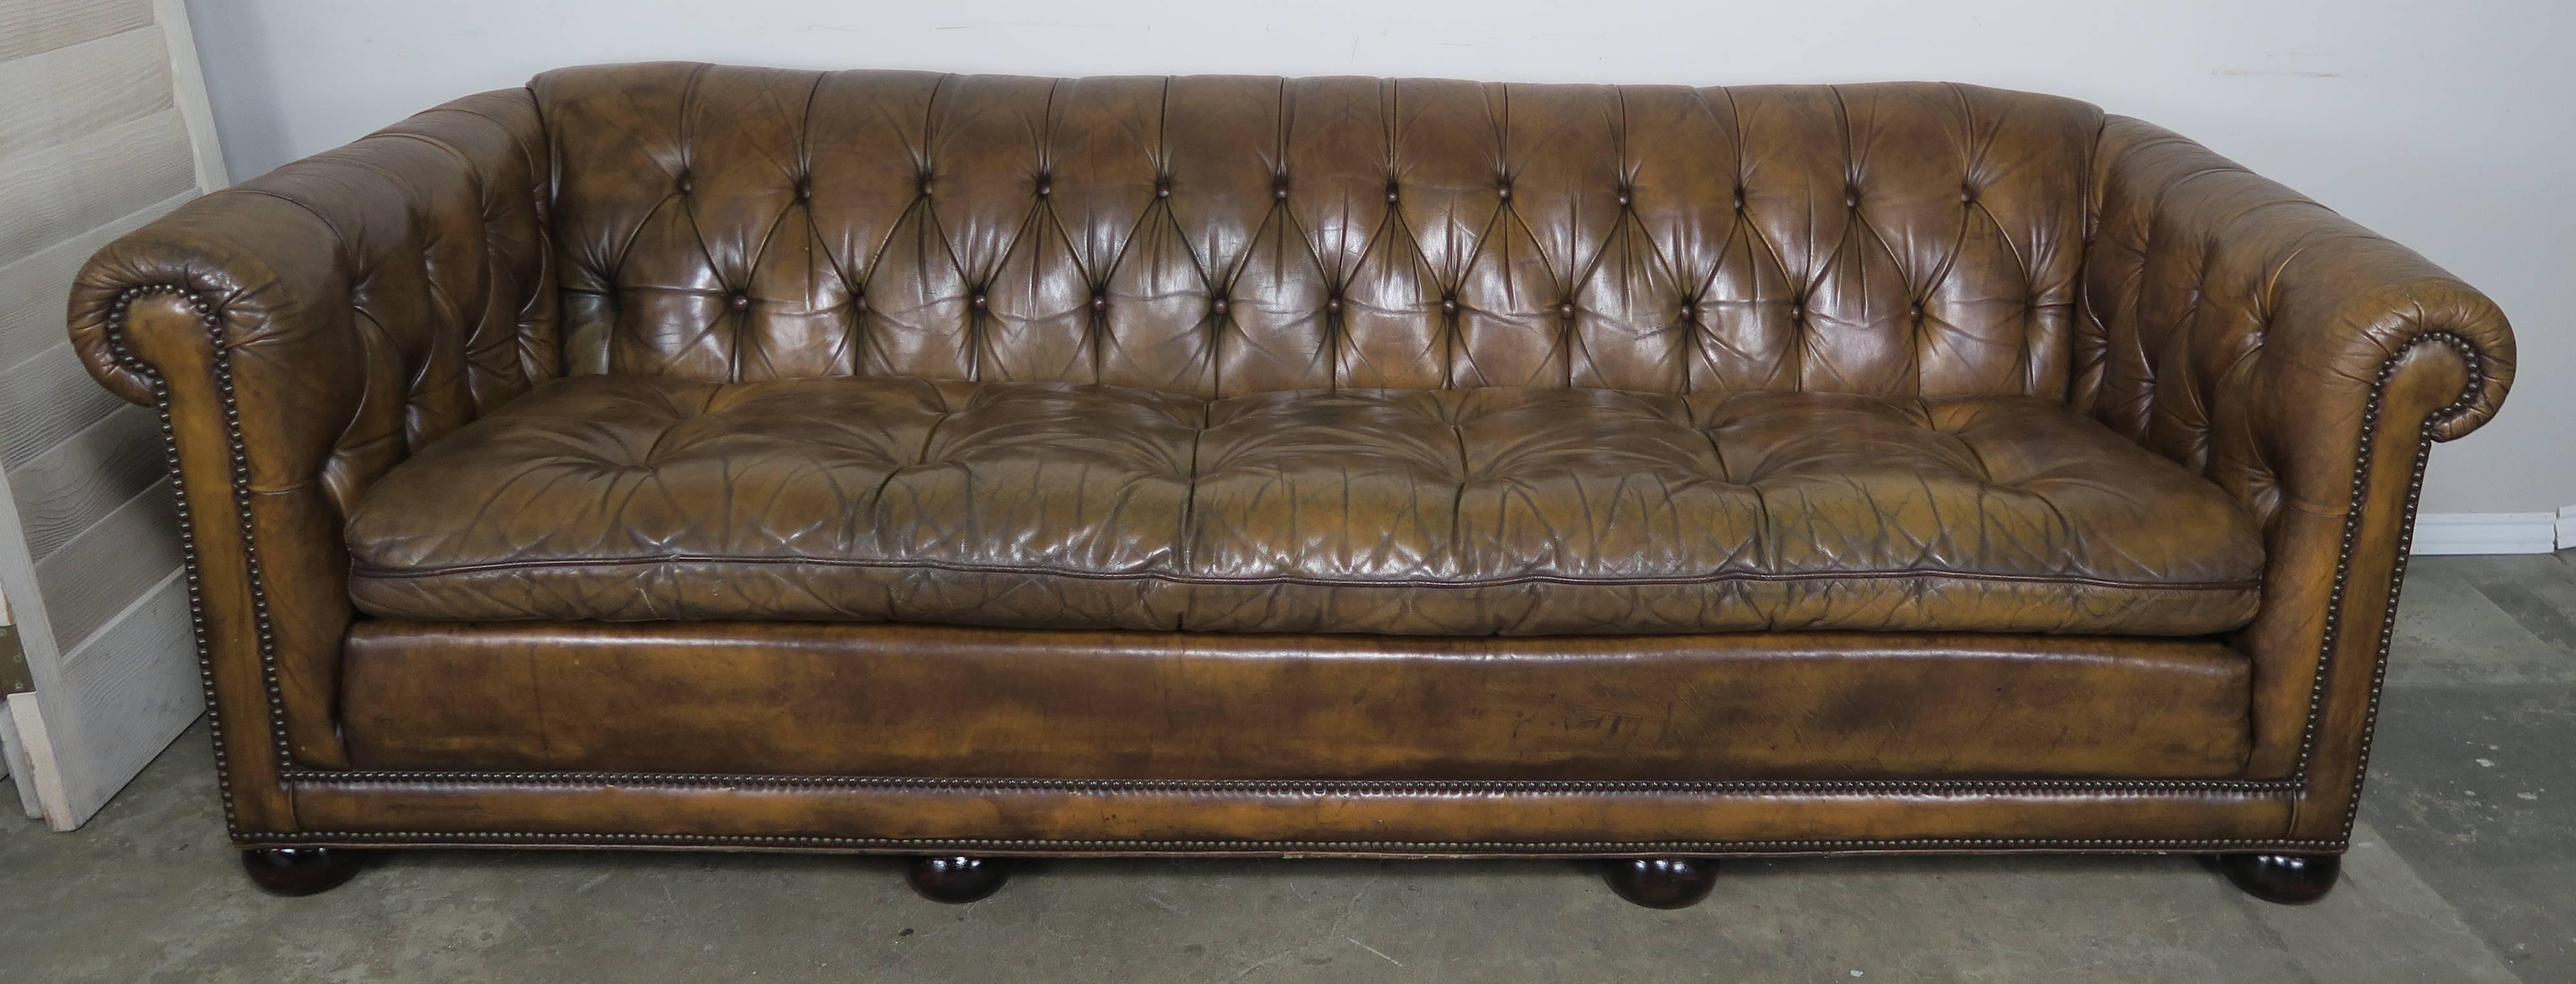 English Tufted Leather Chesterfield Style Sofa, 1930s 3